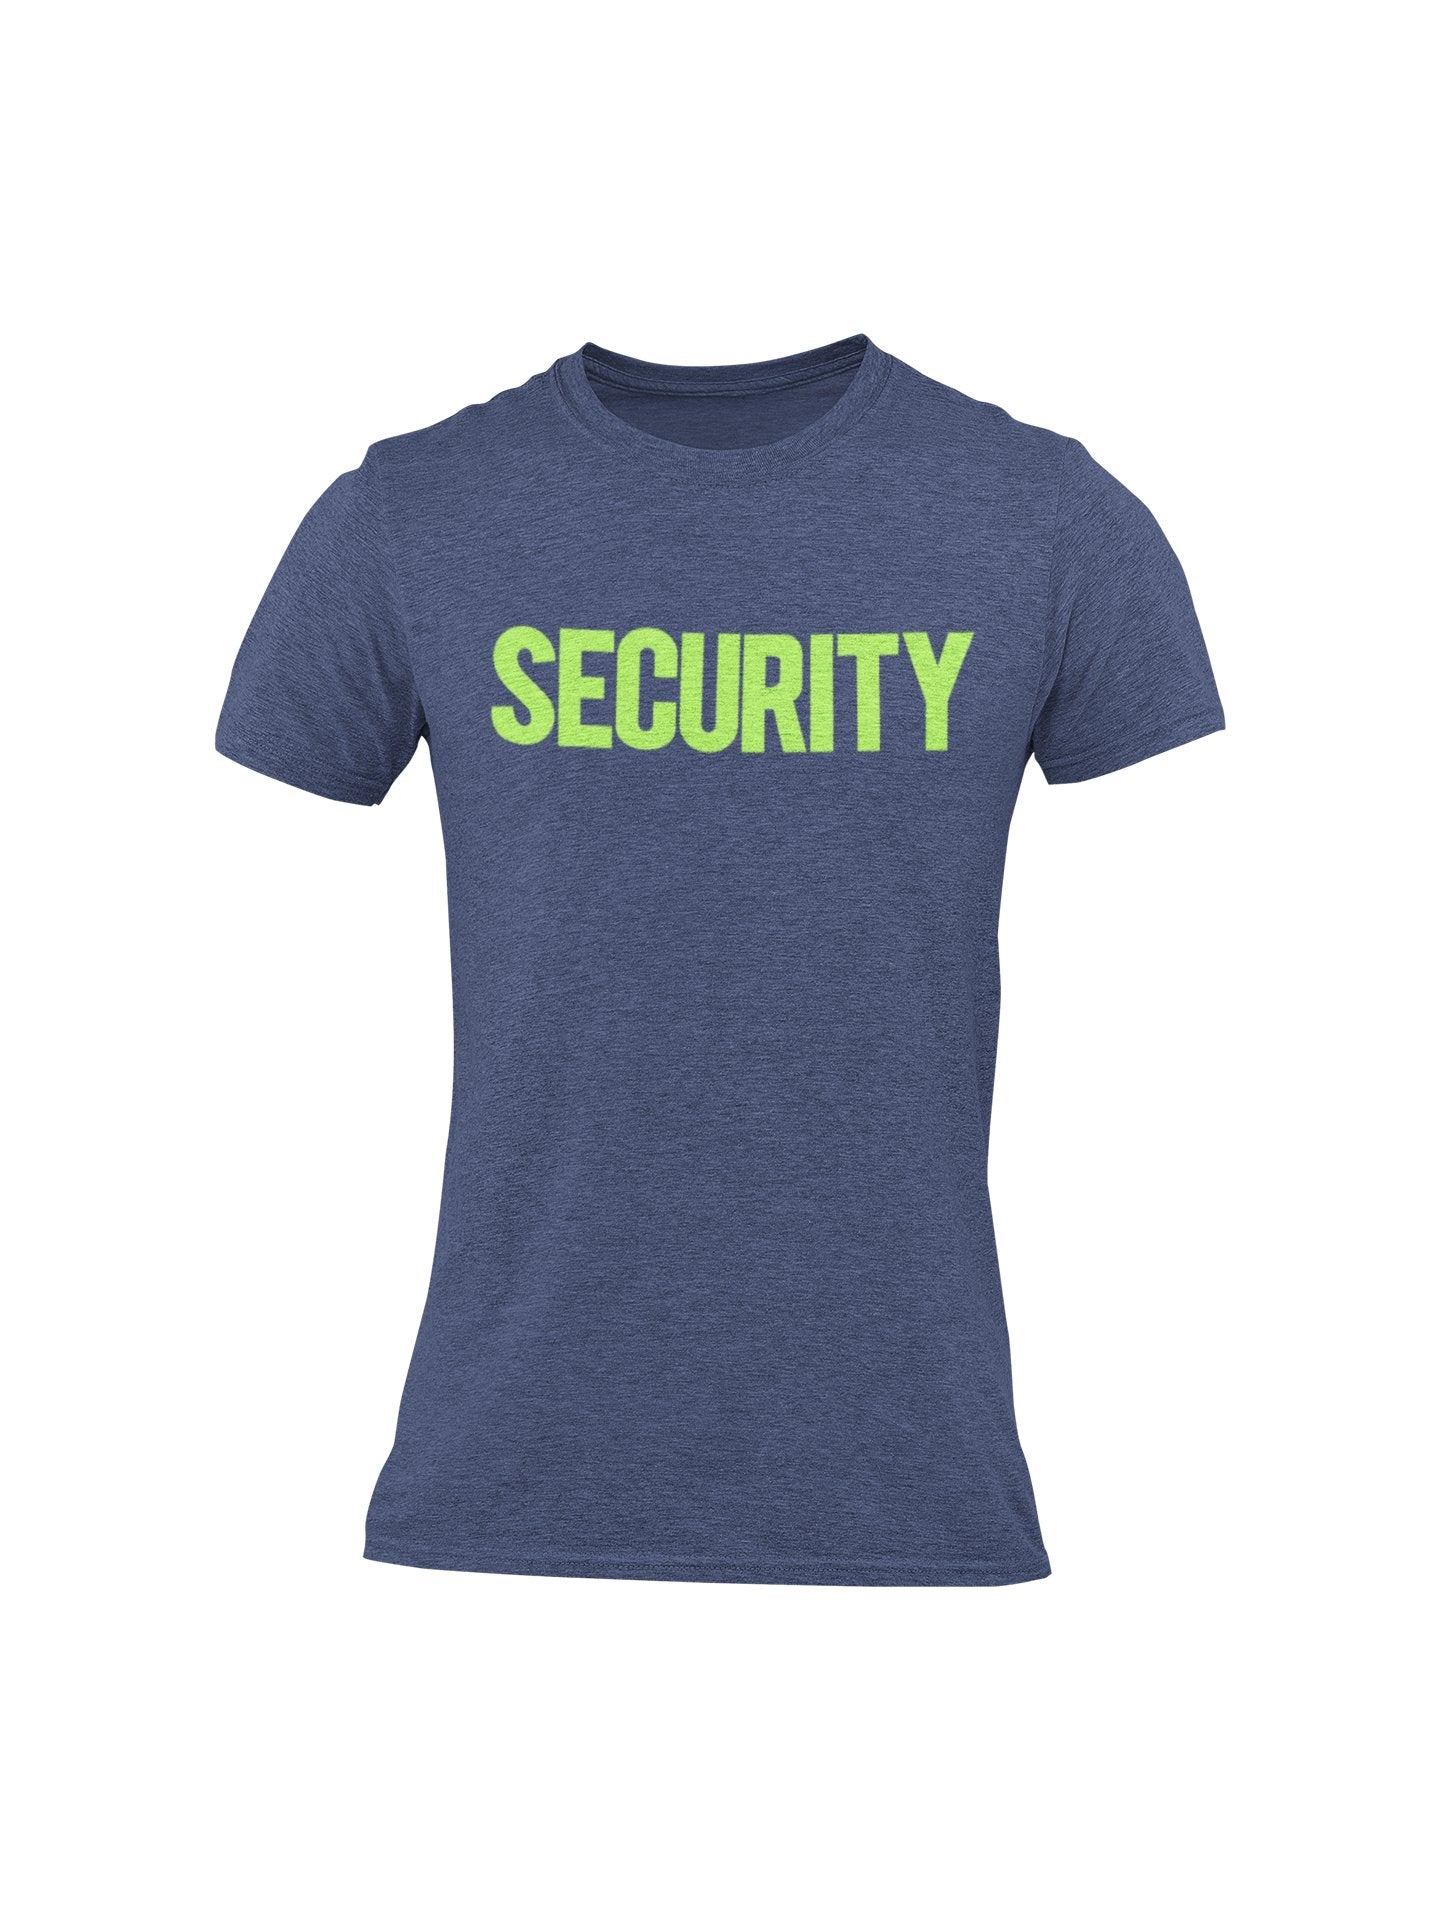 Security T-Shirt Front Back Print Men's Tee Staff Event Uniform Bouncer Screen Printed